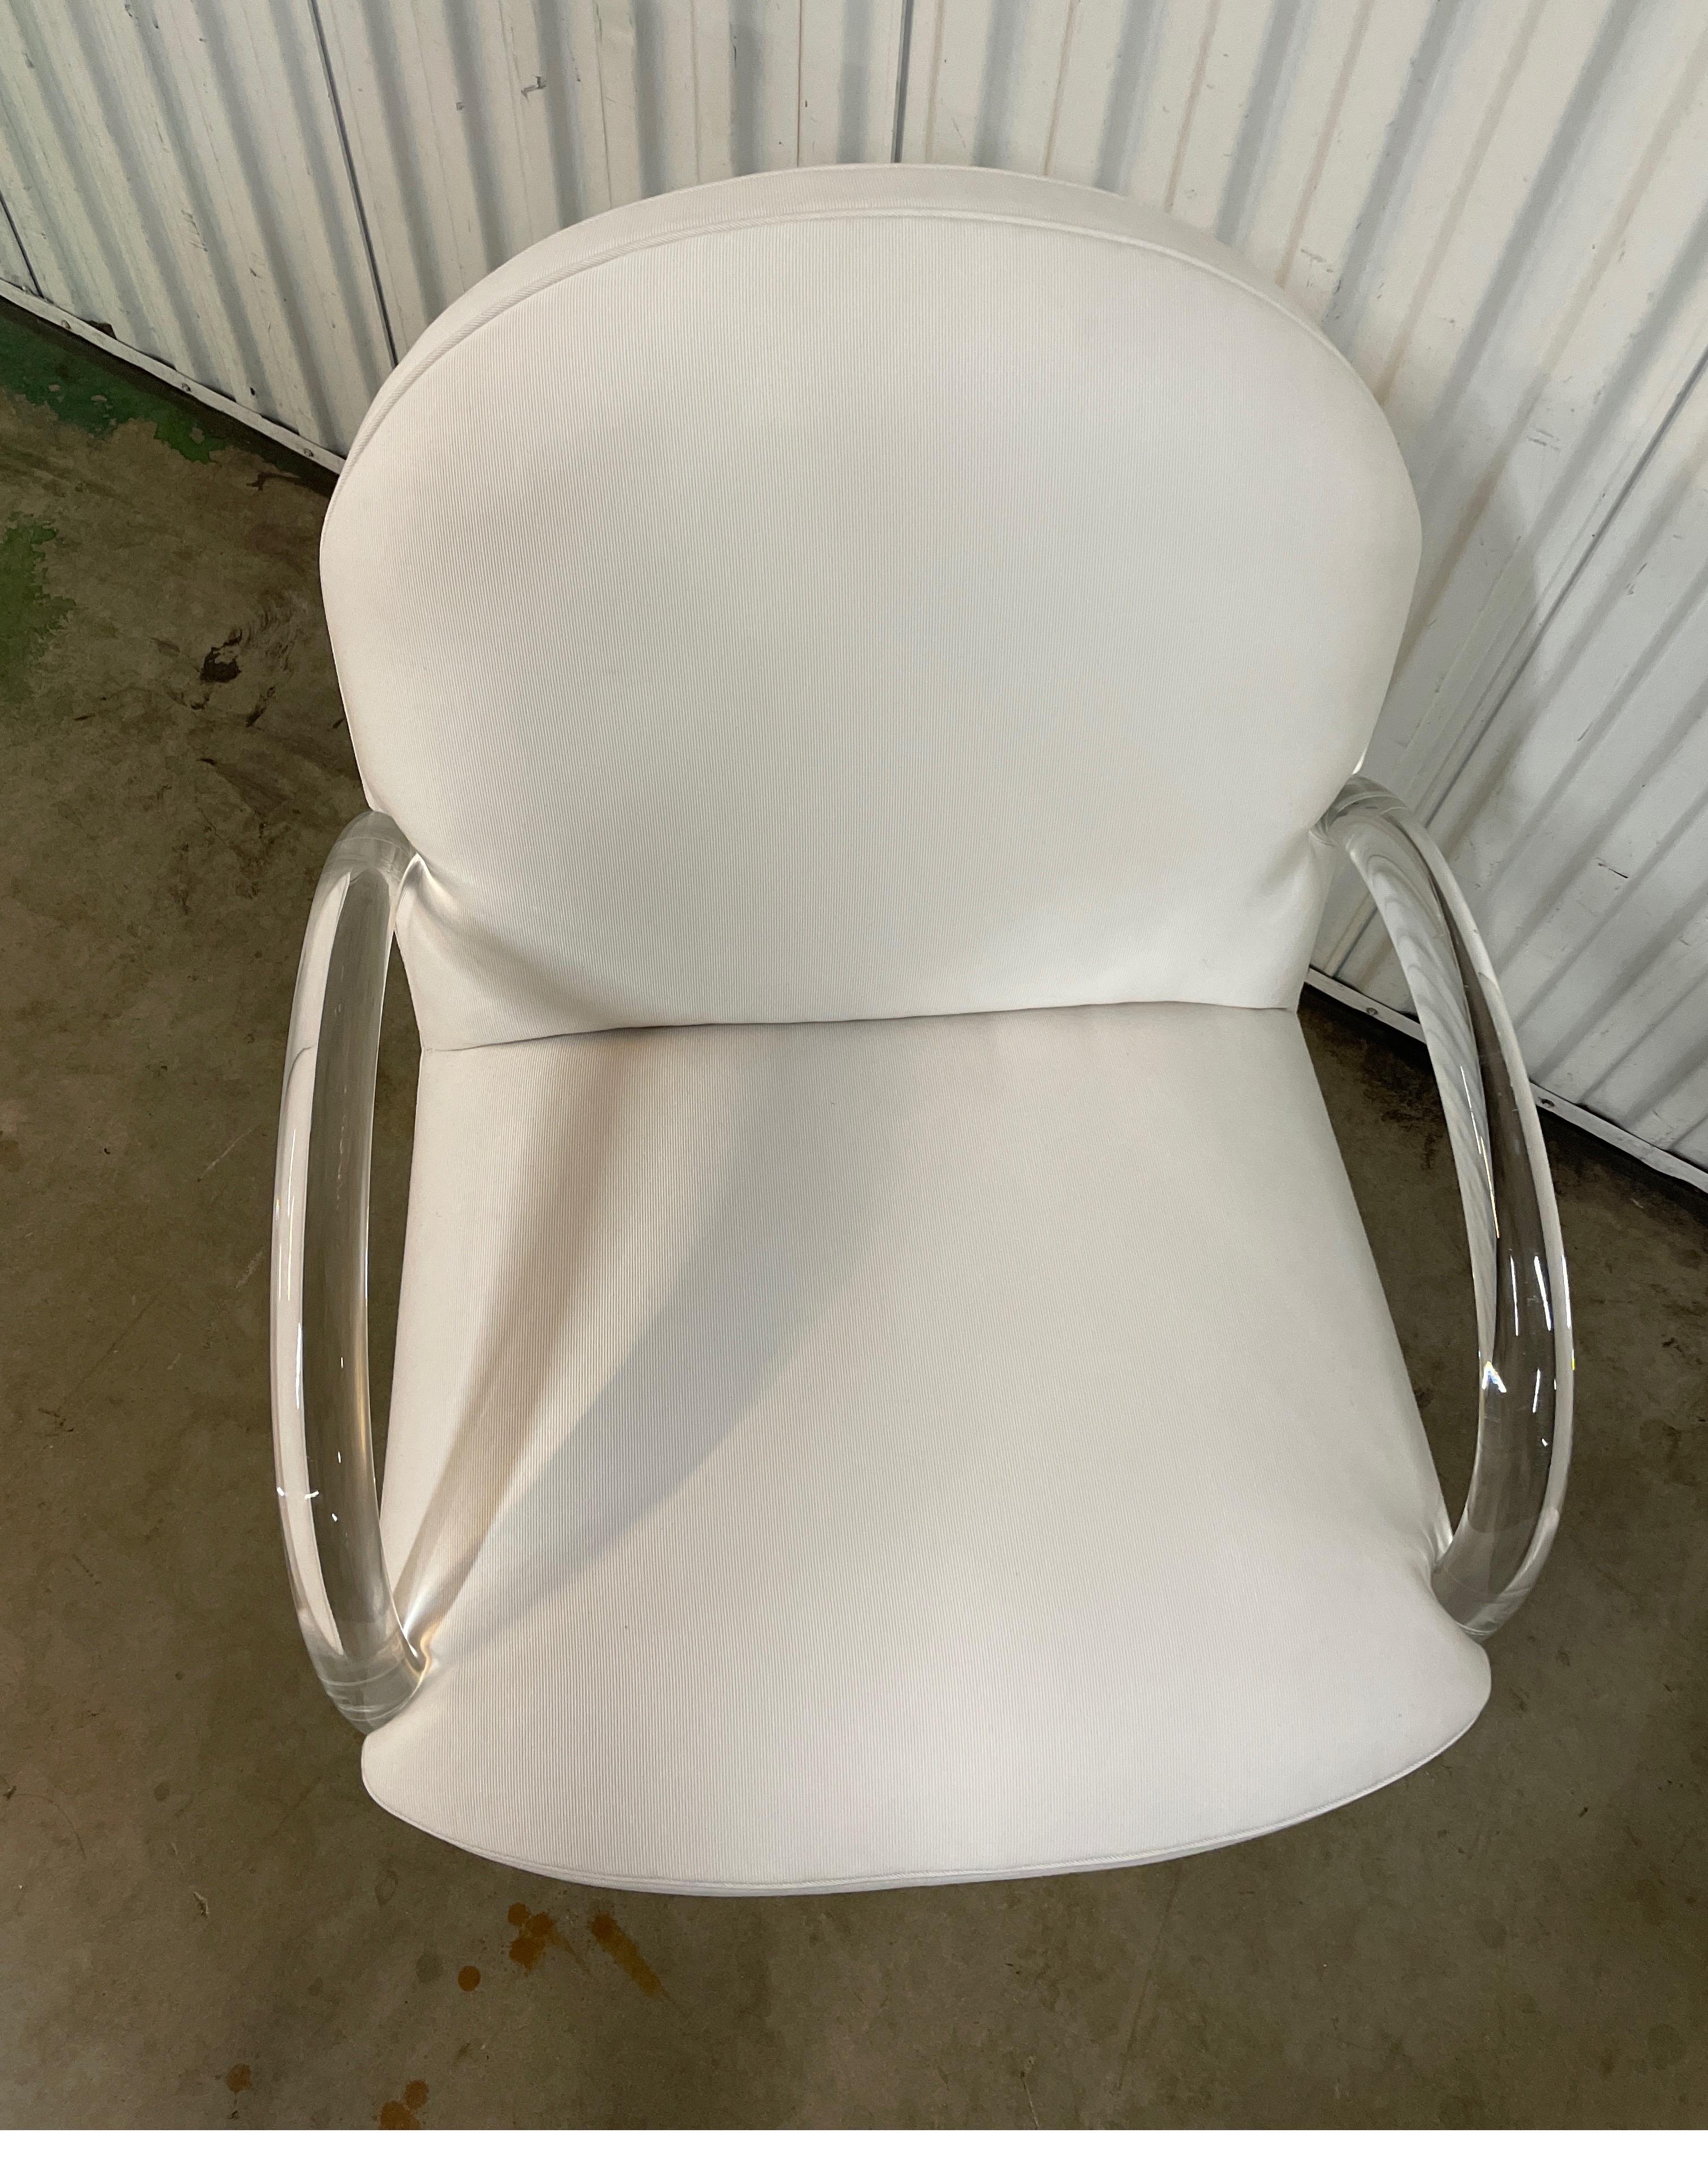 Waterfall lucite club chair with newly upholstered white fabric.